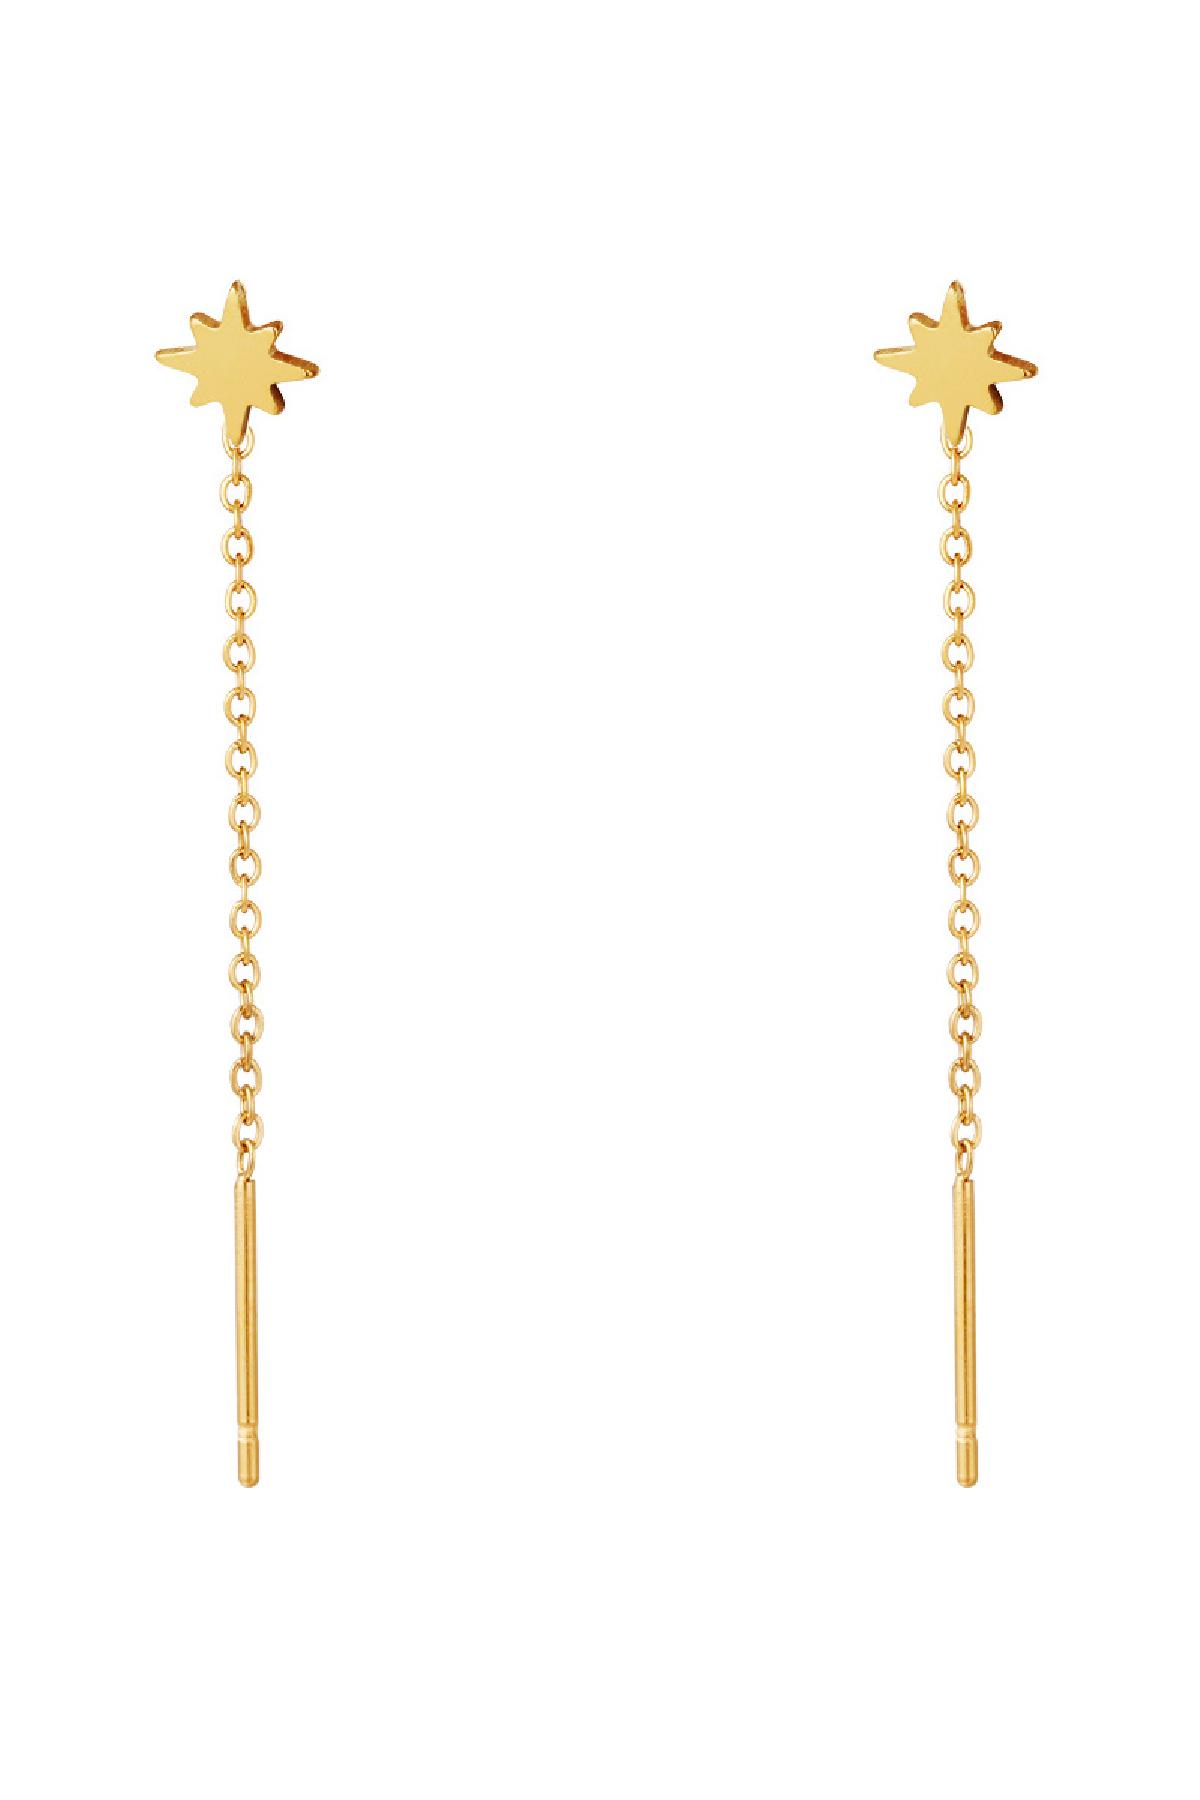 Gold / Stainless Steel Chain Earrings Star Gold Picture2